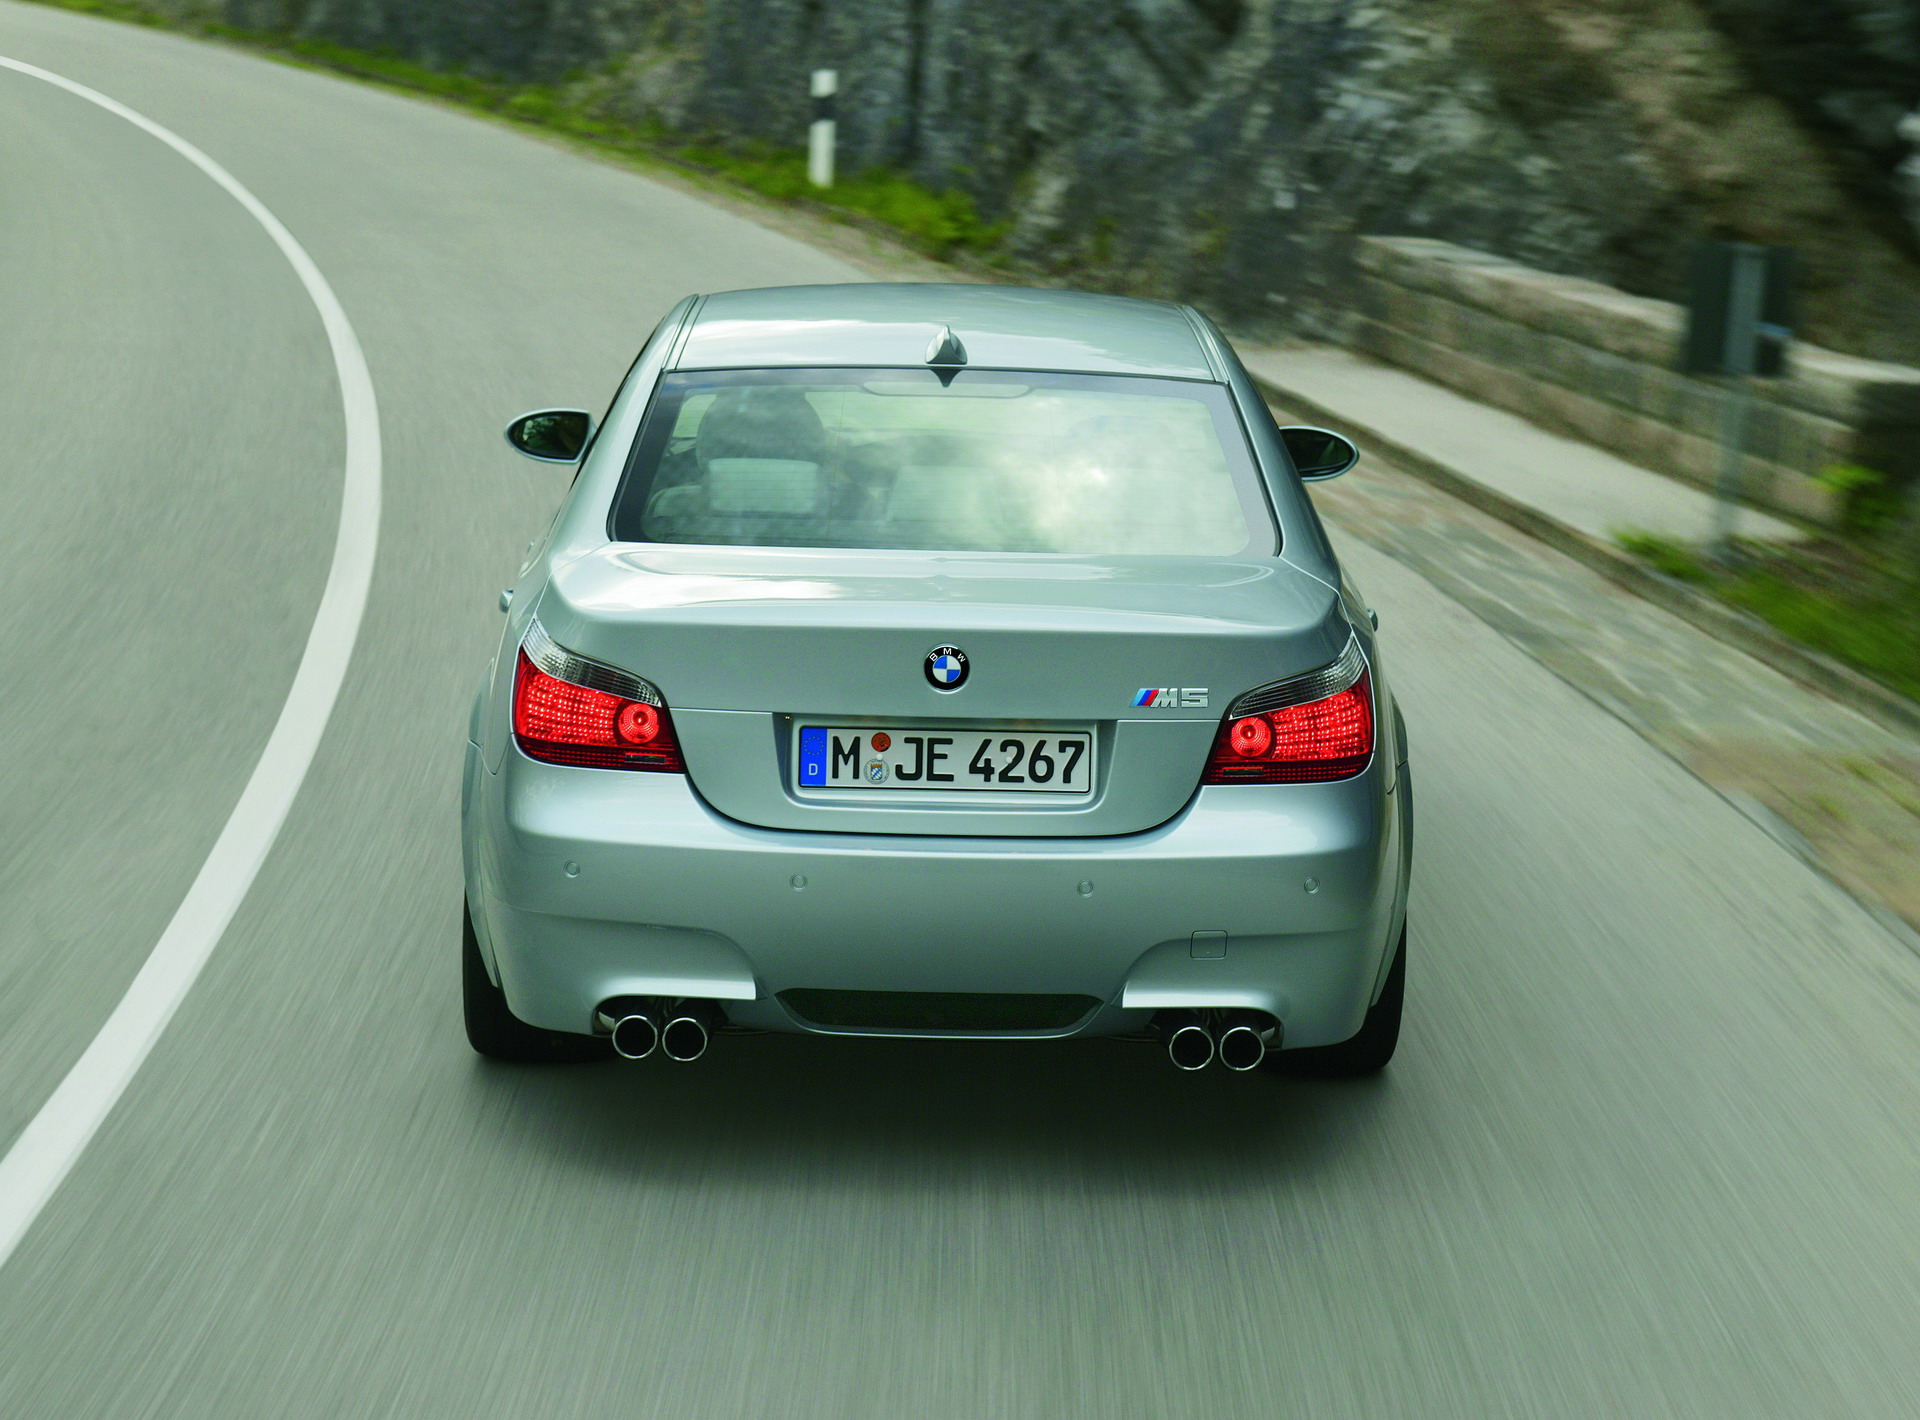 Marquee Loudspeaker constantly BMW M5 E60 Puts V10 Engine To Work In High-Speed Autobahn Run